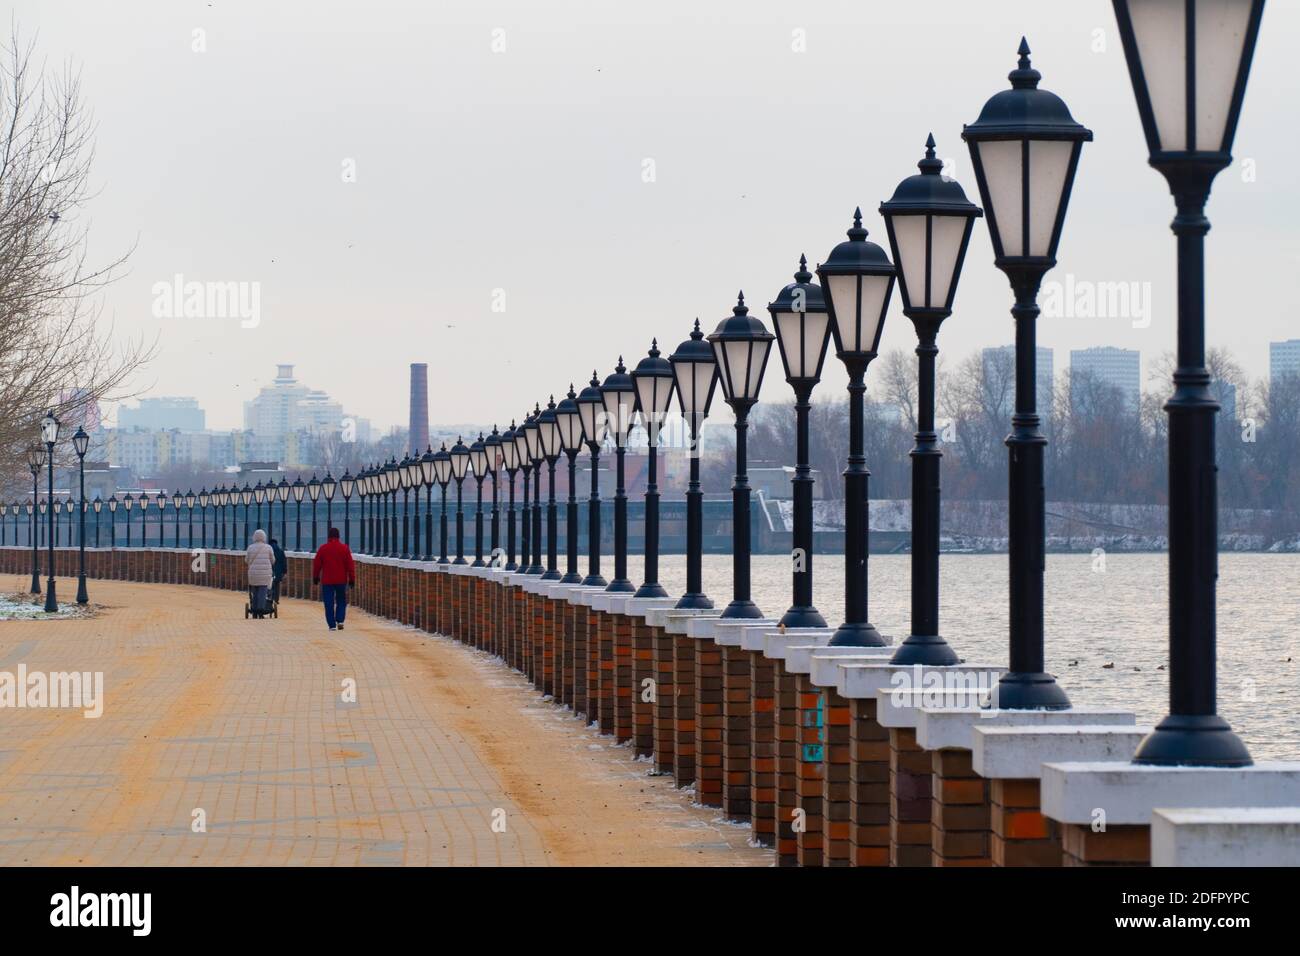 Lighting lanterns during the day in Moscow 2020 Stock Photo